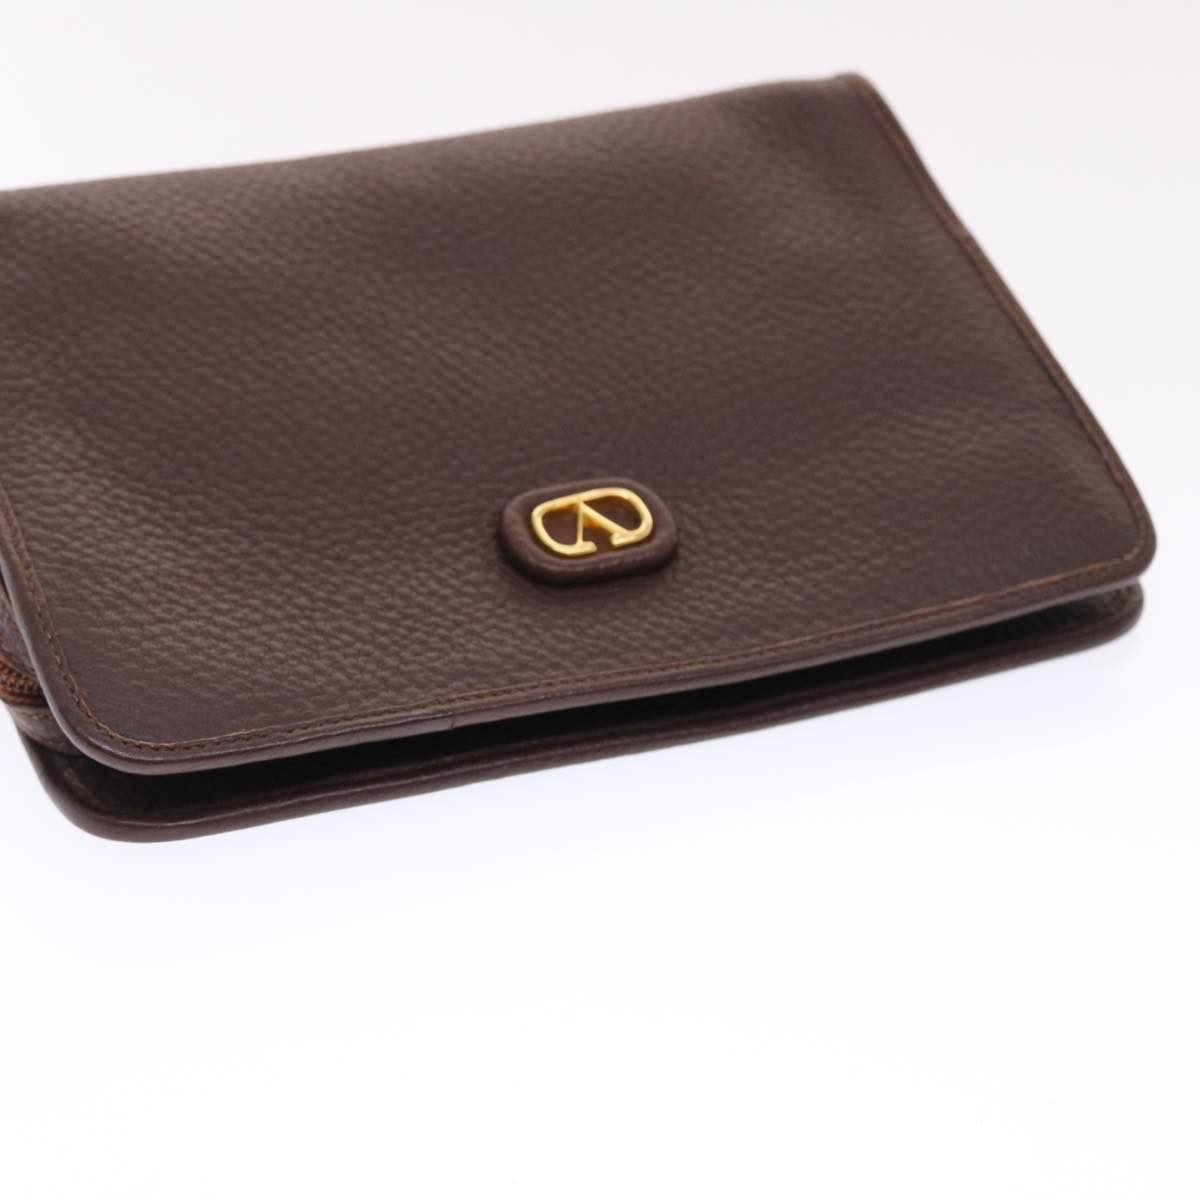 VALENTINO Clutch Bag Leather Brown Auth bs7148